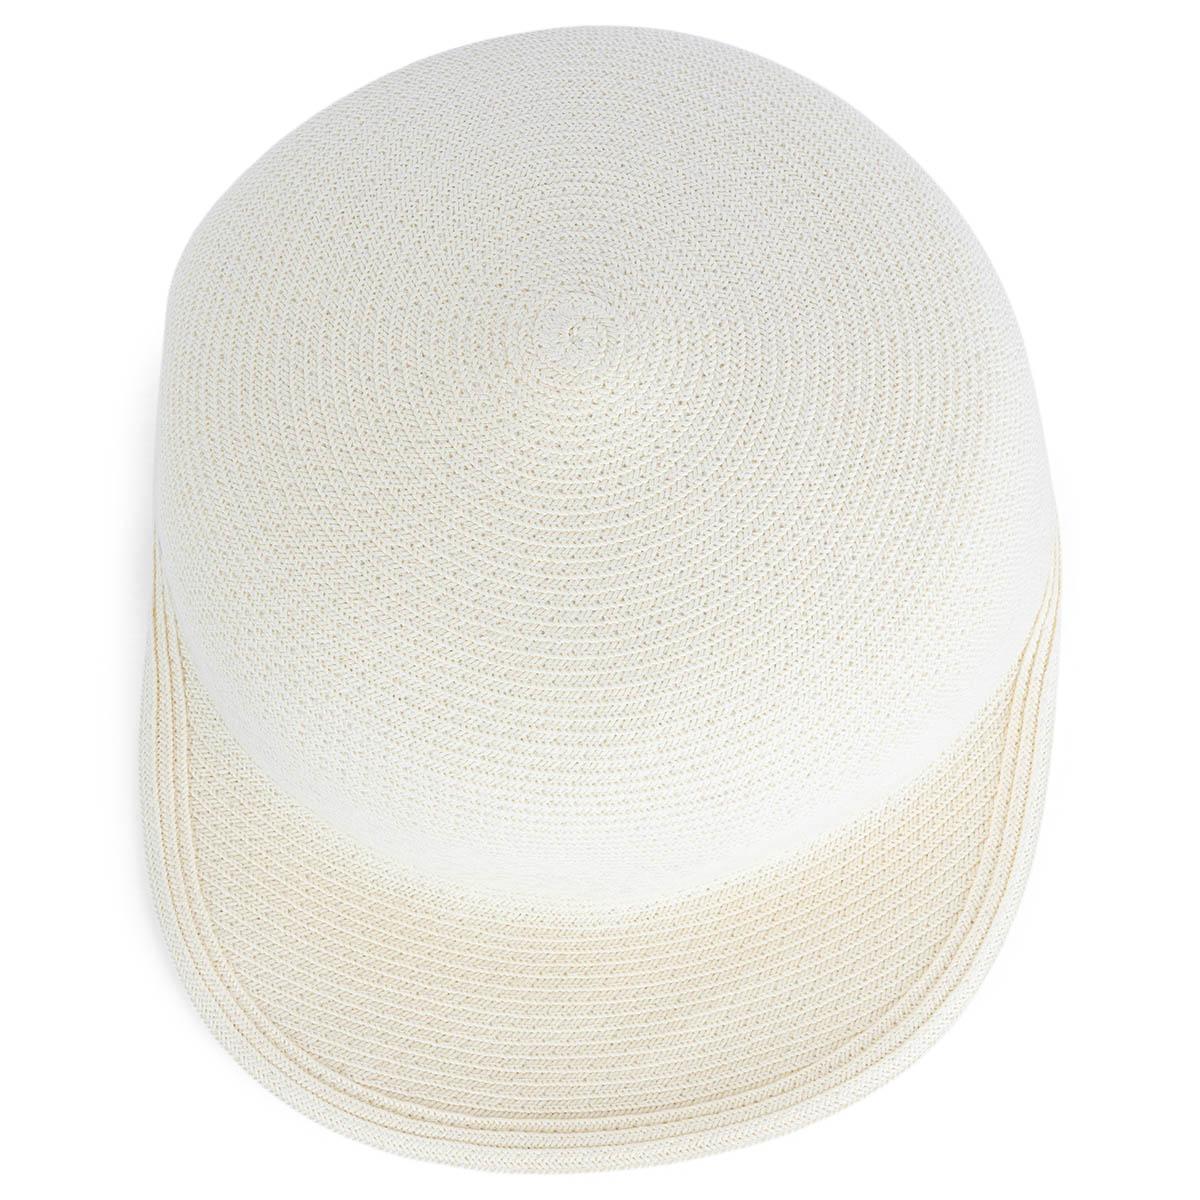 100% authentic Hermès Emma cap in off-white braided paper (with 19% polyester). Featuring and 